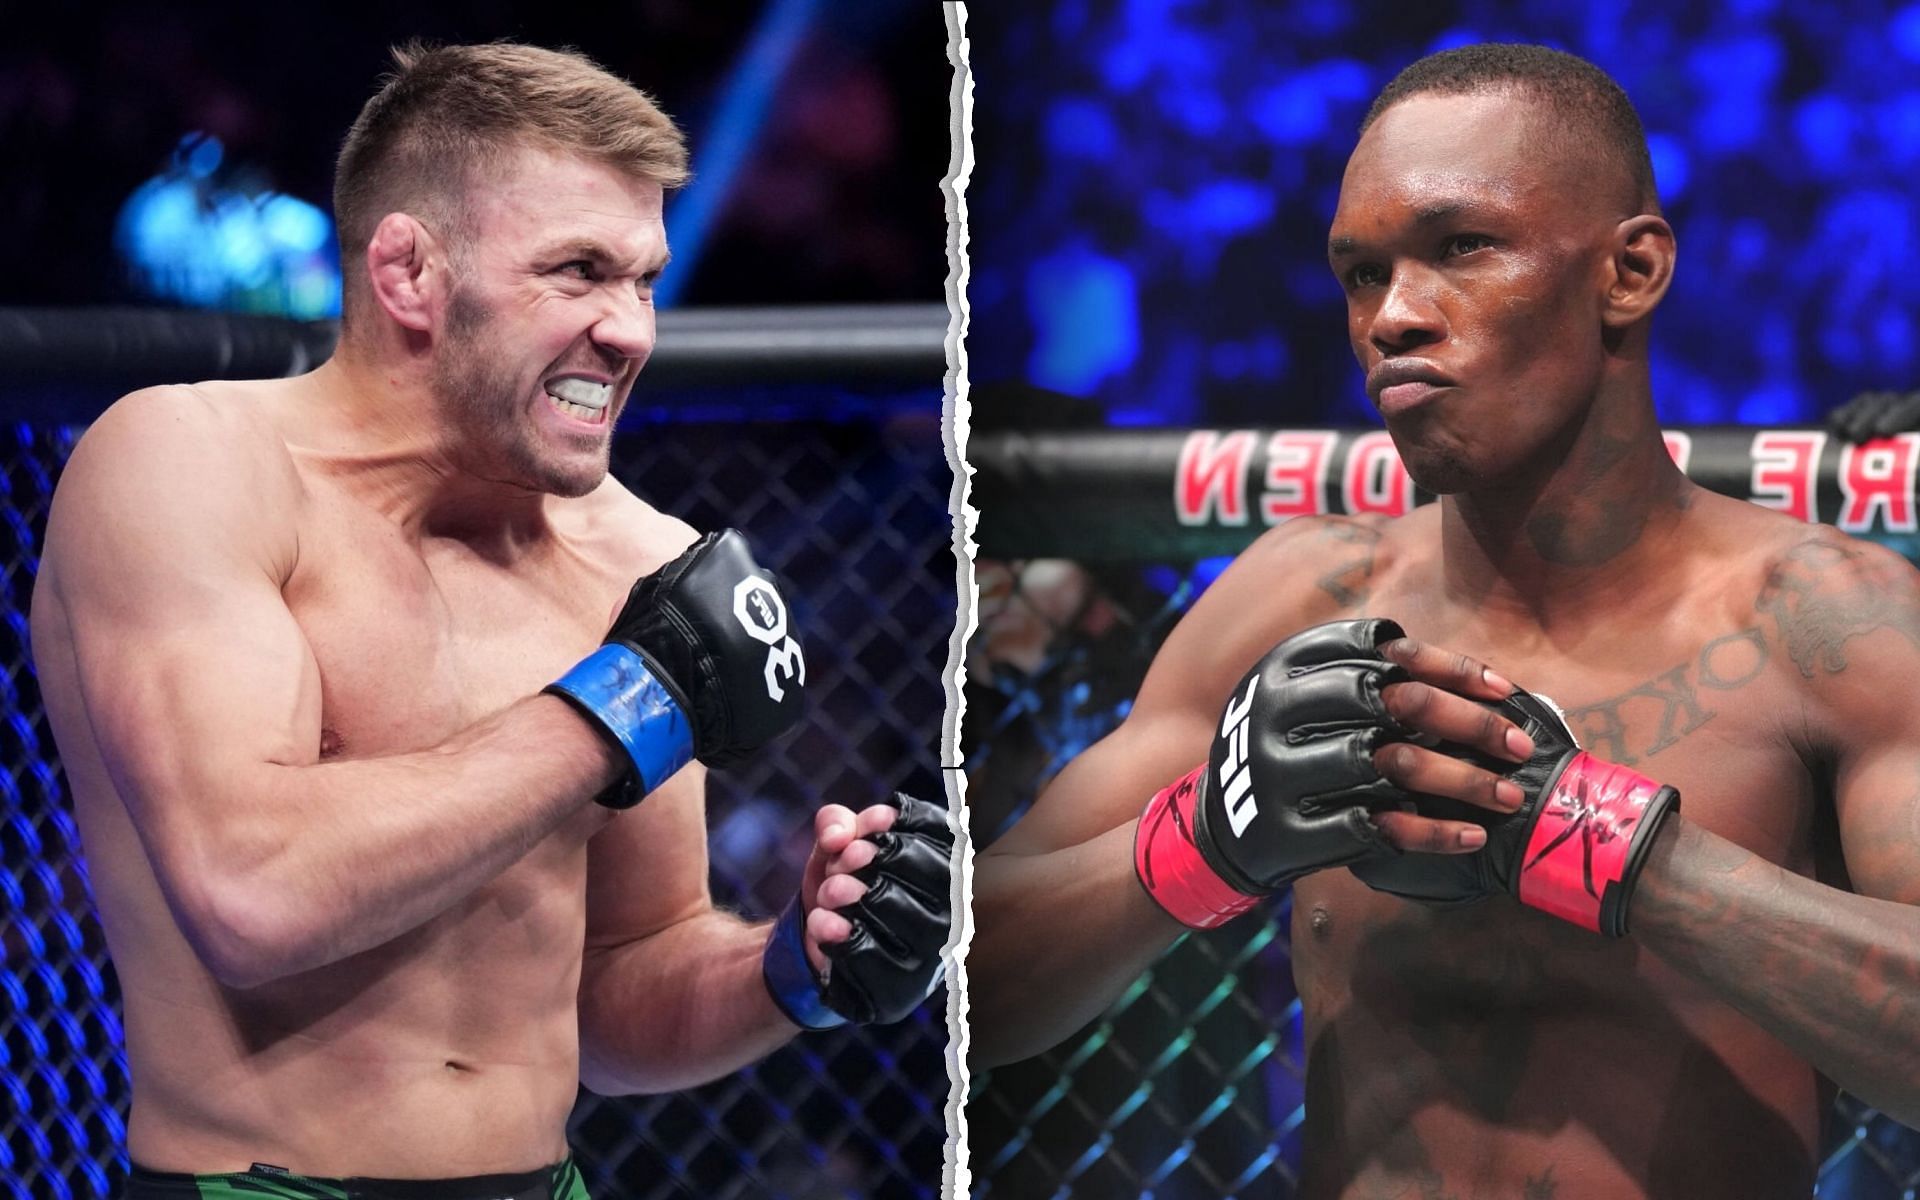 Dricus Du Plessis doubles down on his African pride, responds fiercely to Israel Adesanya&rsquo;s threat post-UFC 287 win